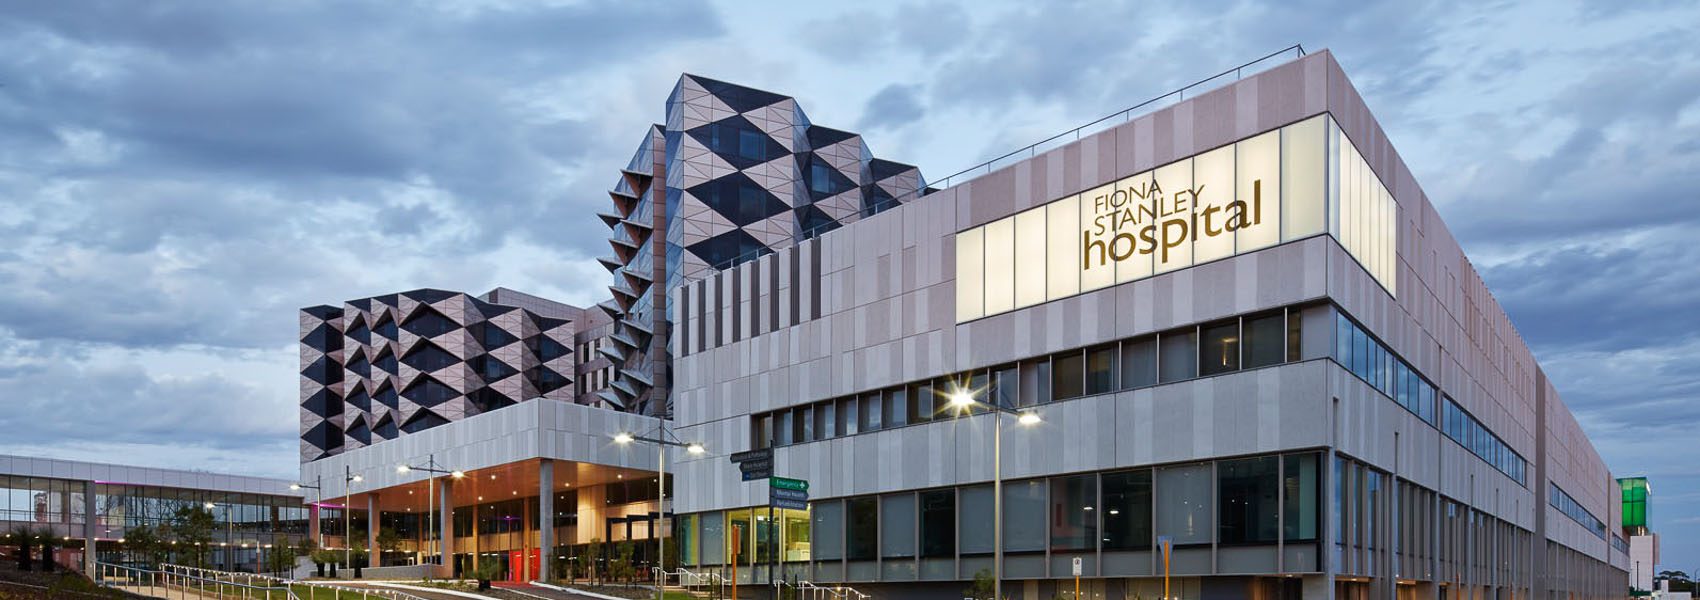 One of the hospitals in Perth